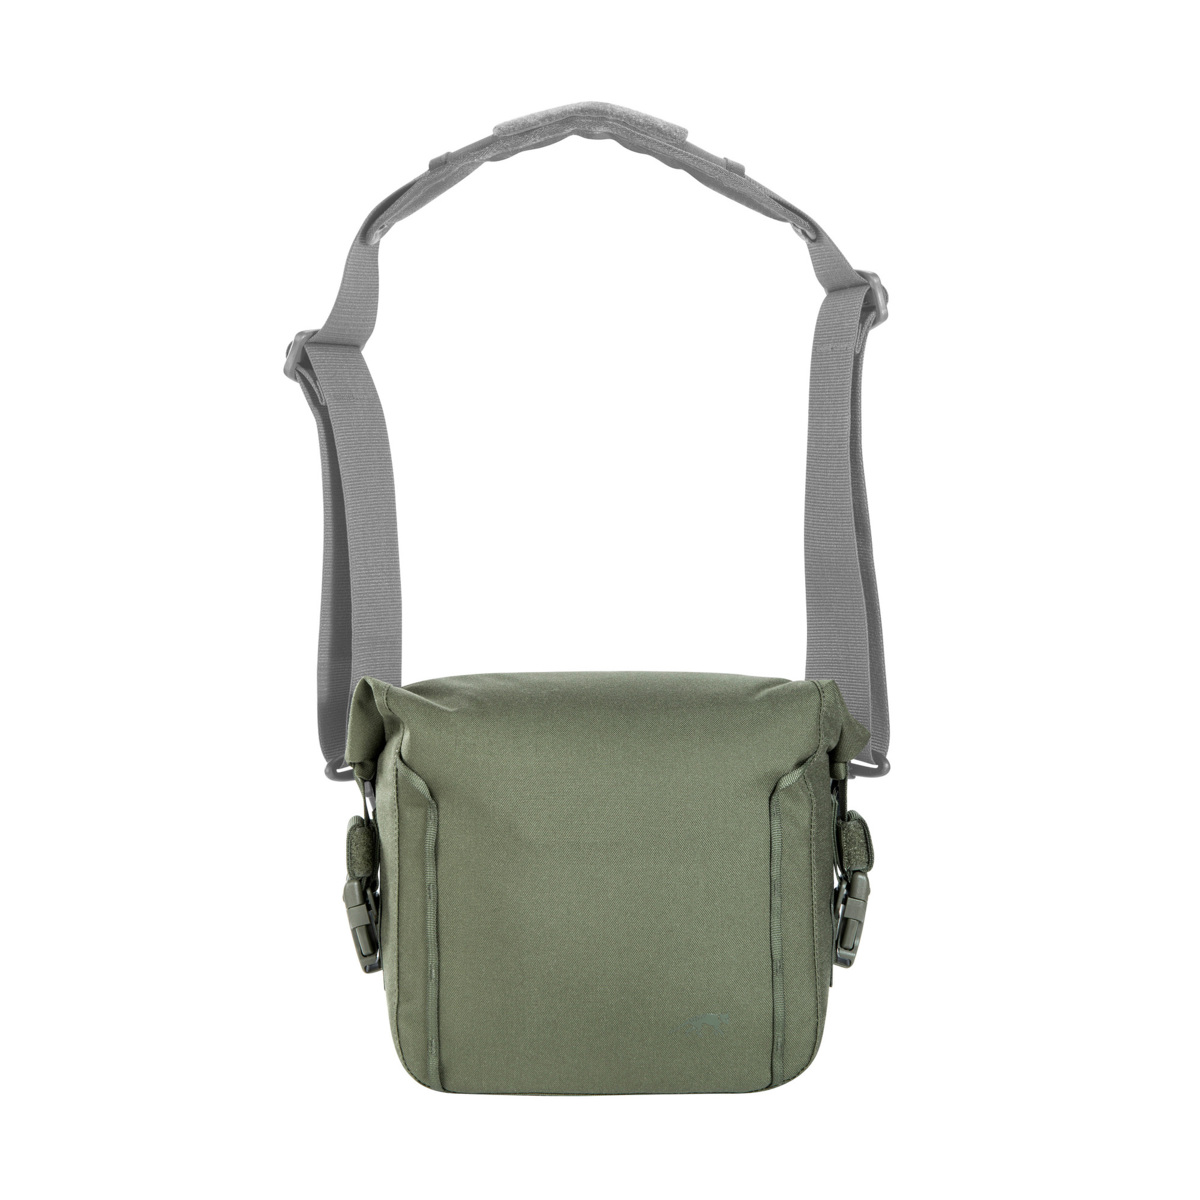 TT Tac Pouch 1 WP Olive